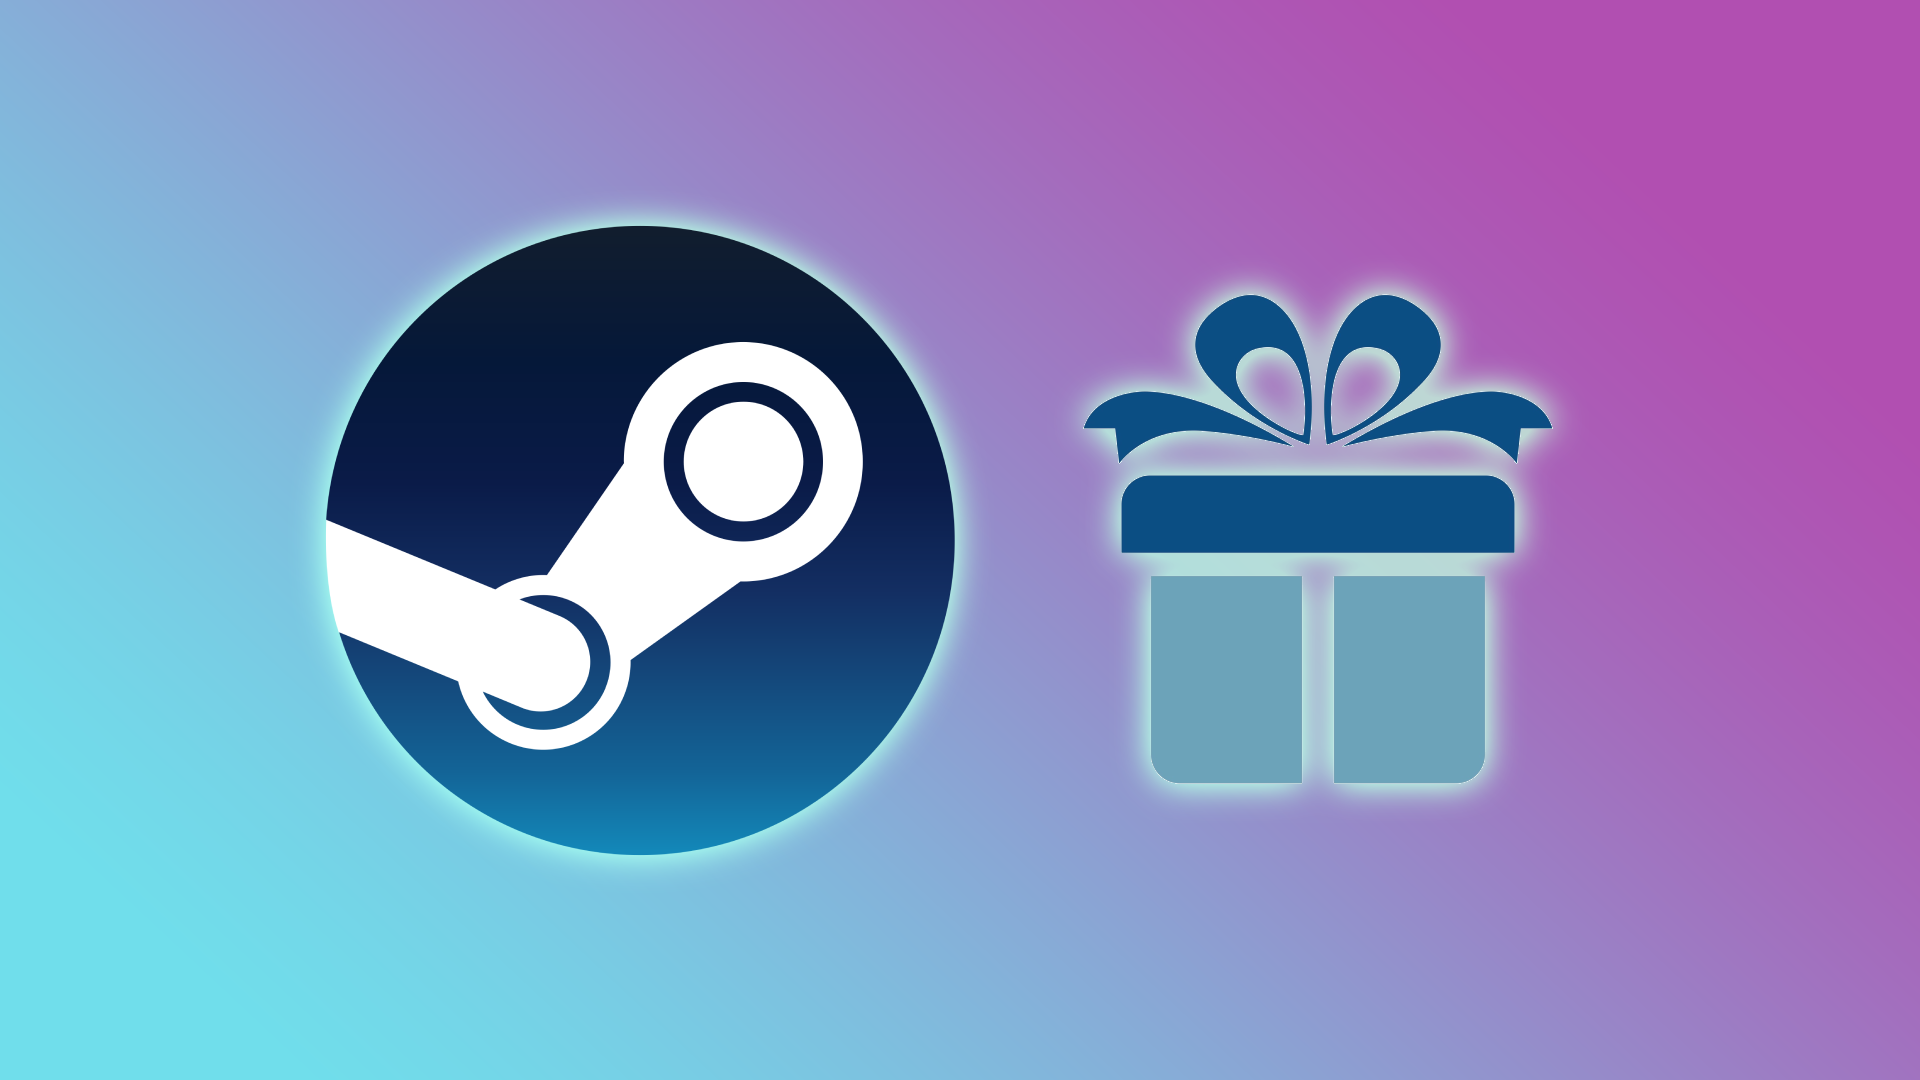 Steam users have trouble gifting games to friends